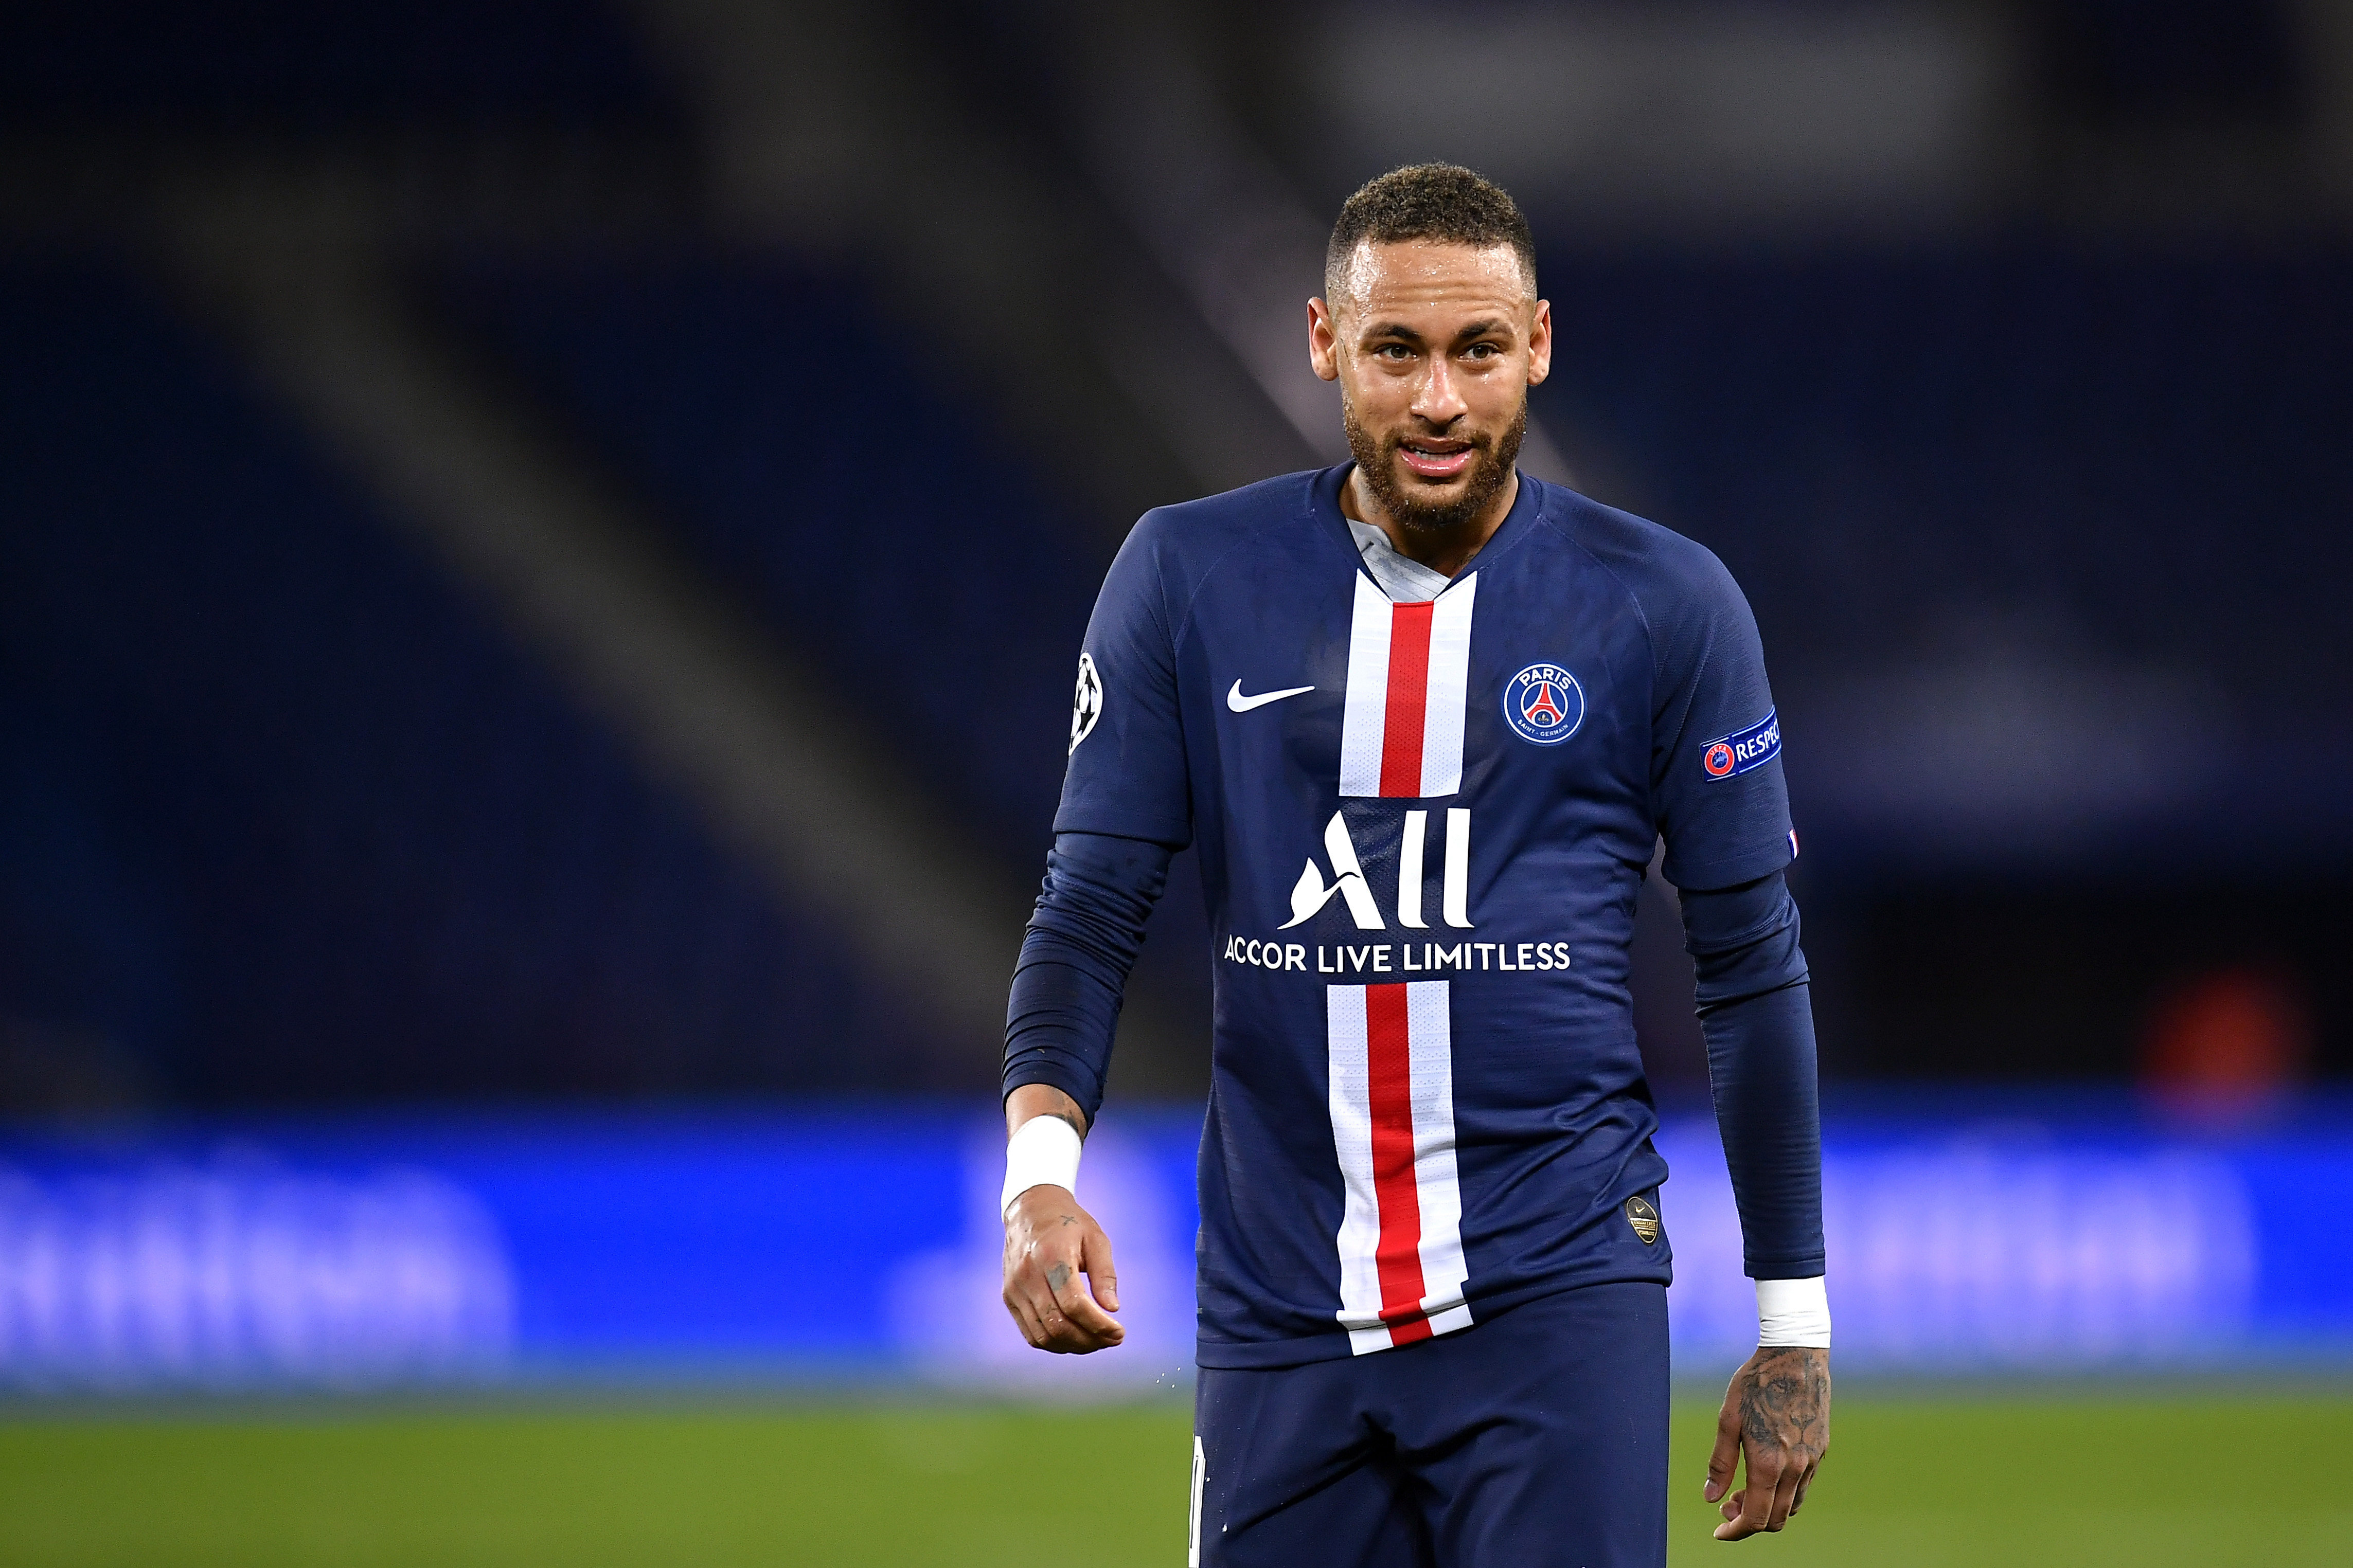 Now you can play Fortnite as Brazilian national soccer player and forward for Paris St Germain,  Neymar. Photo: by Aurelien Meunier/PSG via Getty Images